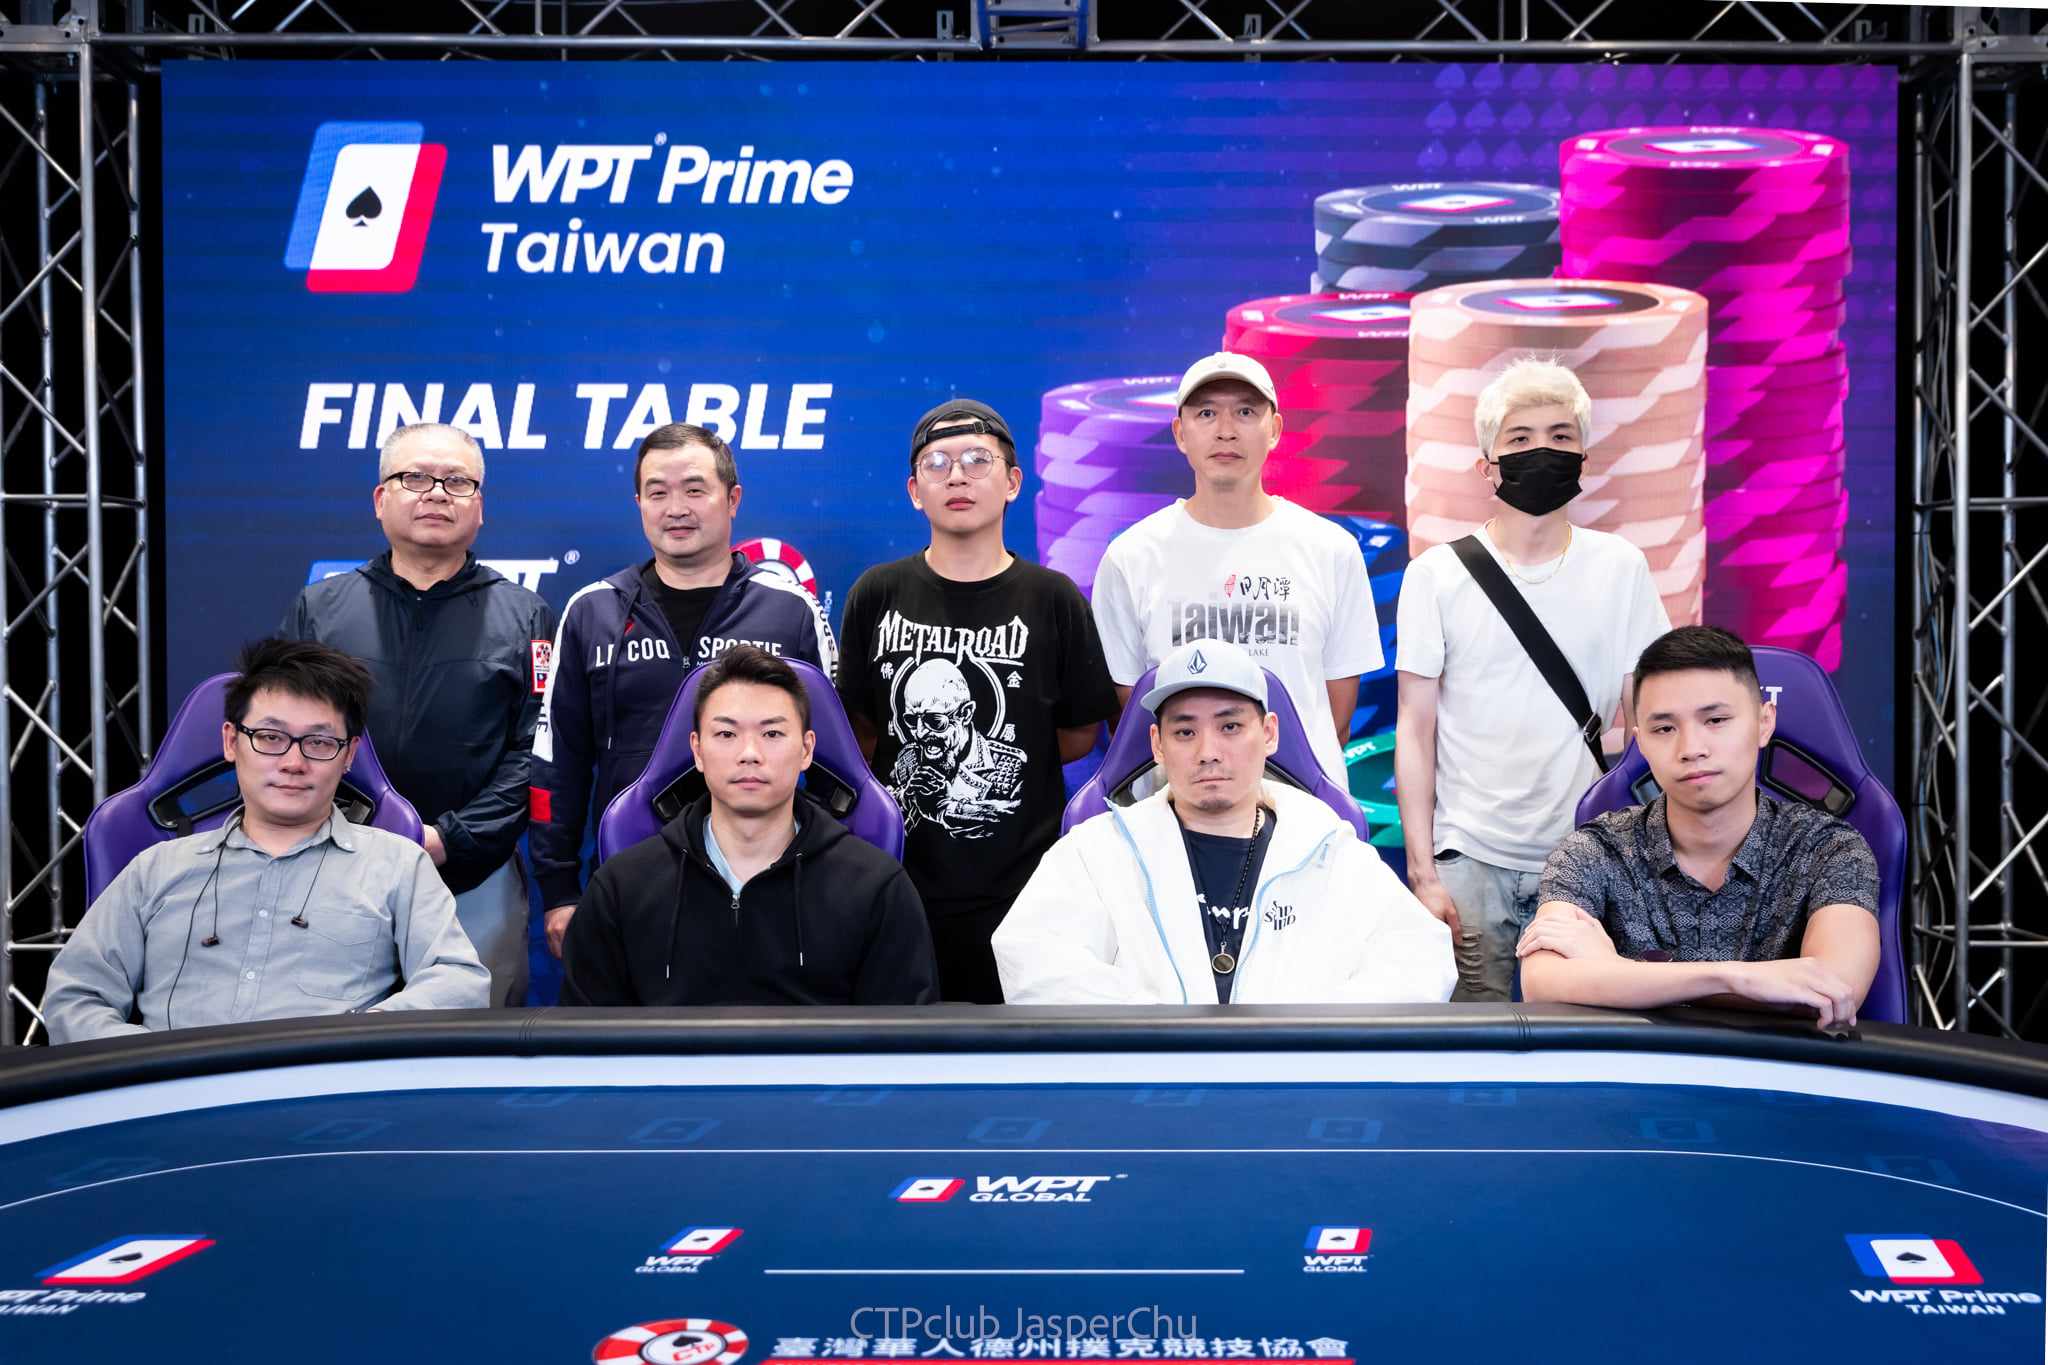 WPT Prime Taiwan - Day 4 highlights: Yan Chen Jiang, Wei Tsung Chen, Chien Hsiang Hung claim trophies; ME Warm Up down to Final 9; Eli Chang leads HR Warm Up